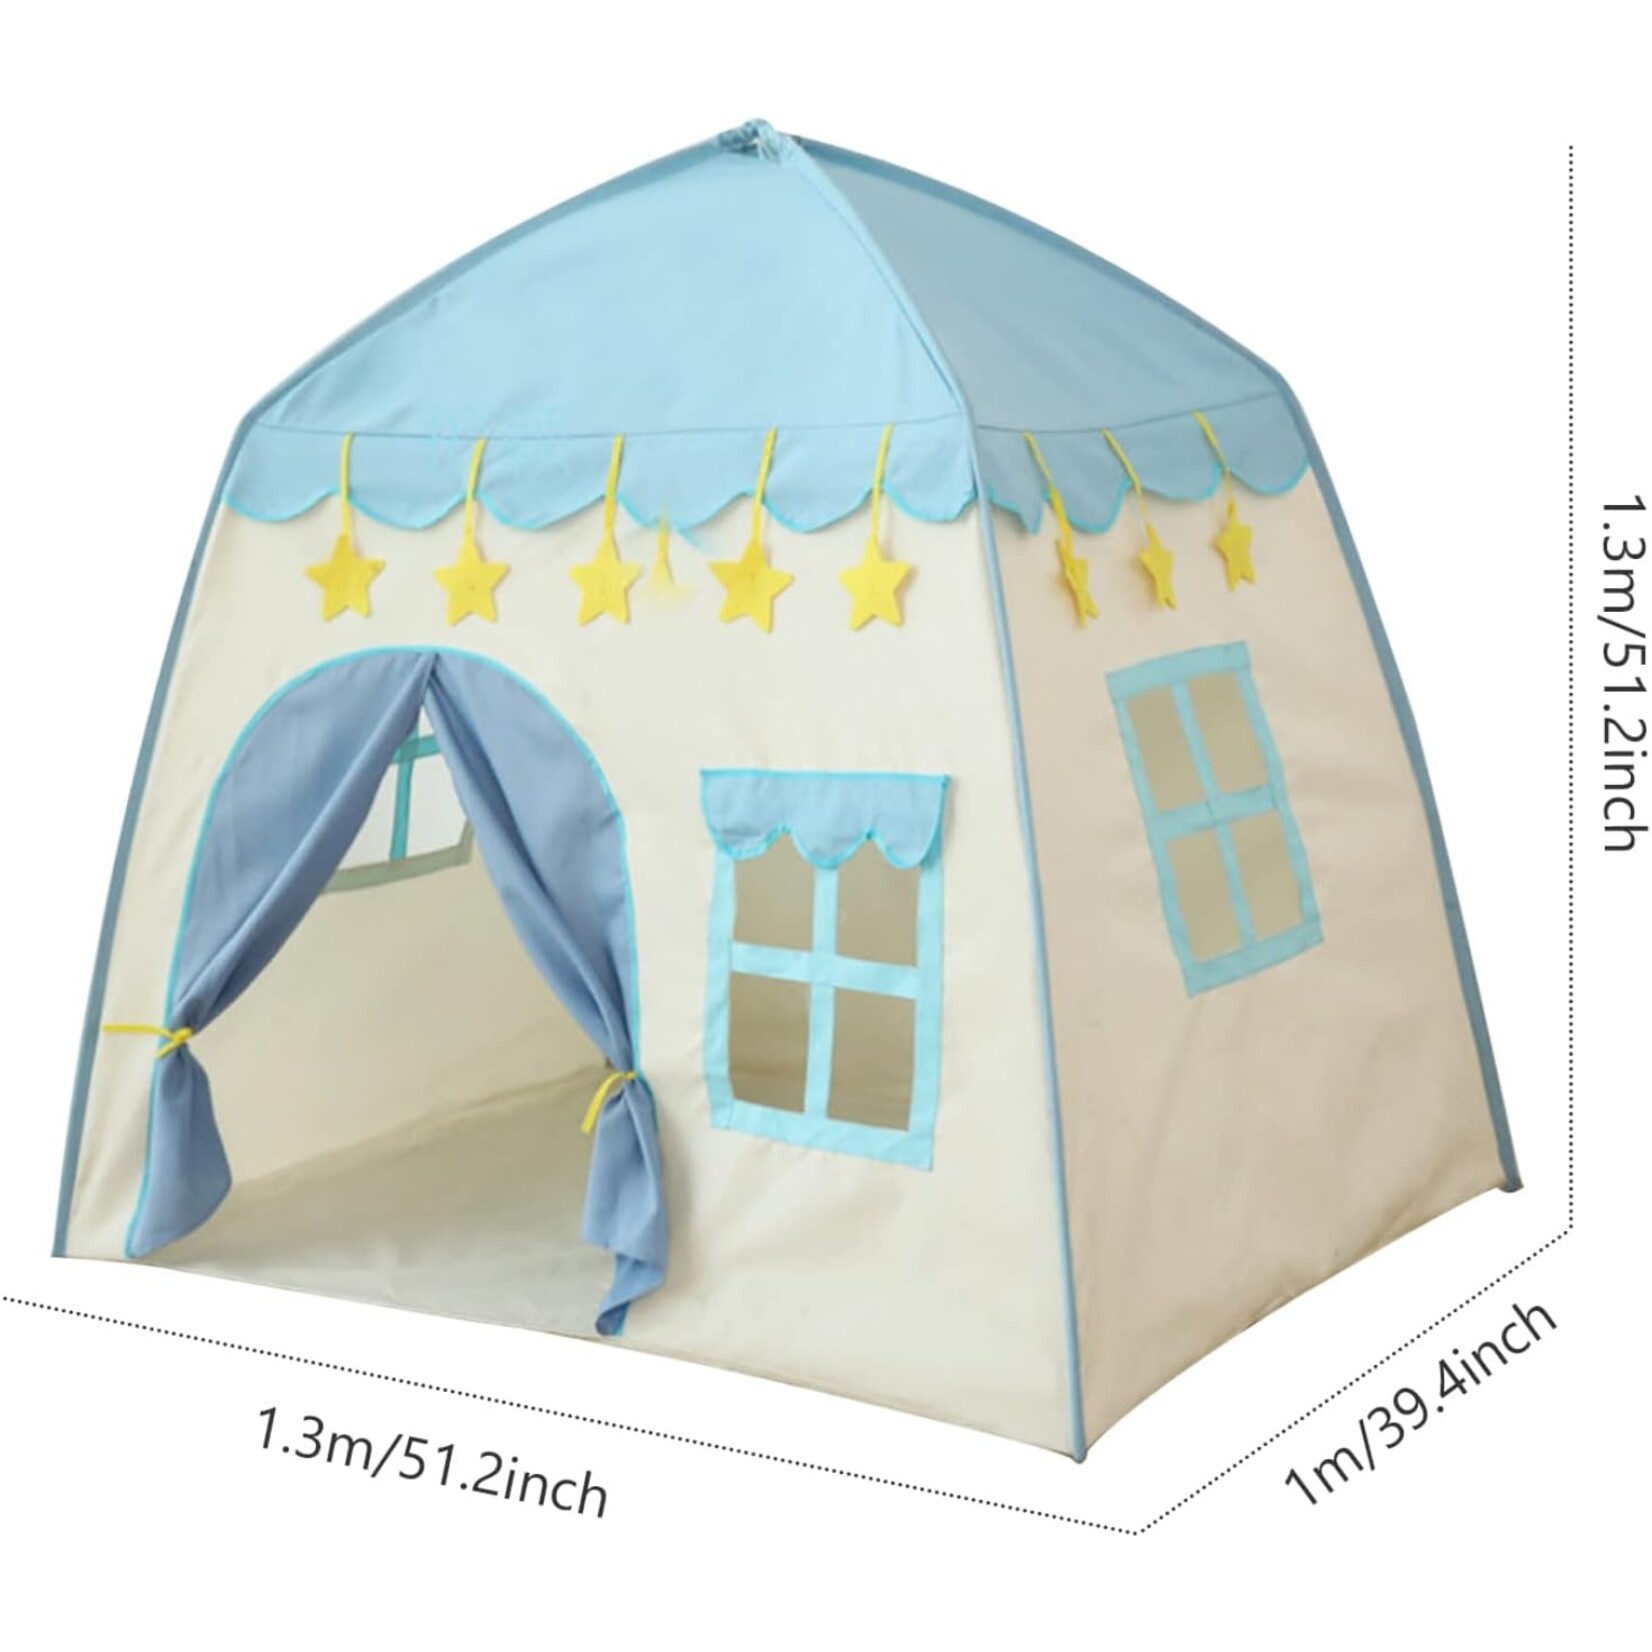 Bobbel Home Bobbel Home - Spacious Play Tent - For indoor and outdoor use - Blue & White